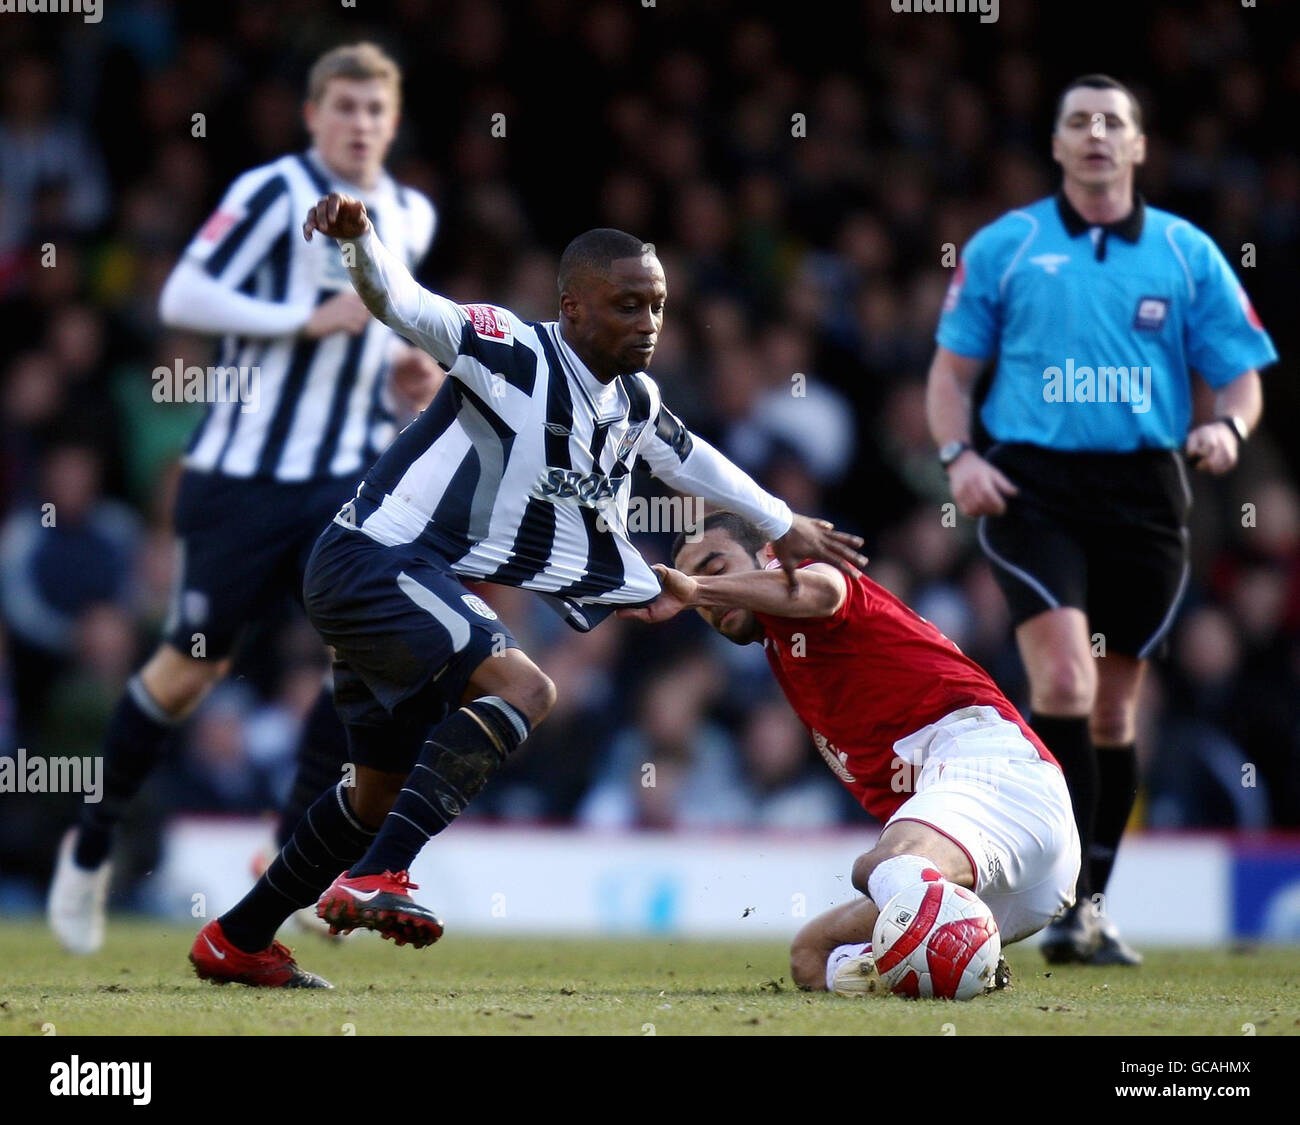 West Brom's Andwele Slory is tackled by Bristol City's Liam Fontaine during the Coca-Cola Championship match at Ashton Gate, Bristol. Stock Photo